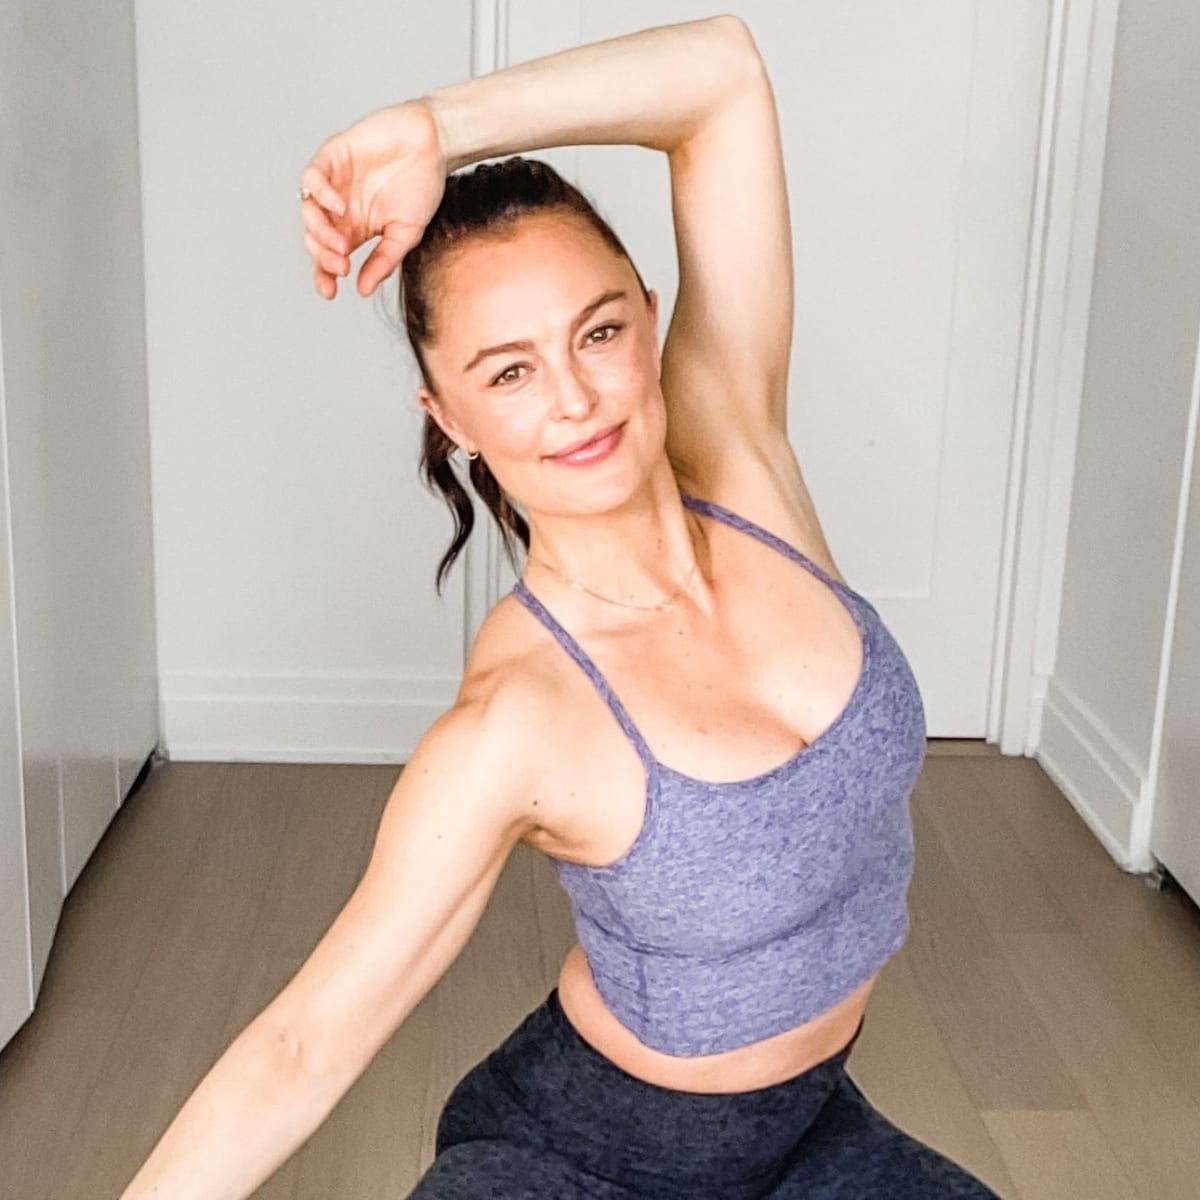 Sculpt Society Founder Megan Roup Shares Her All-Time Favorite Purchases -  Forbes Vetted